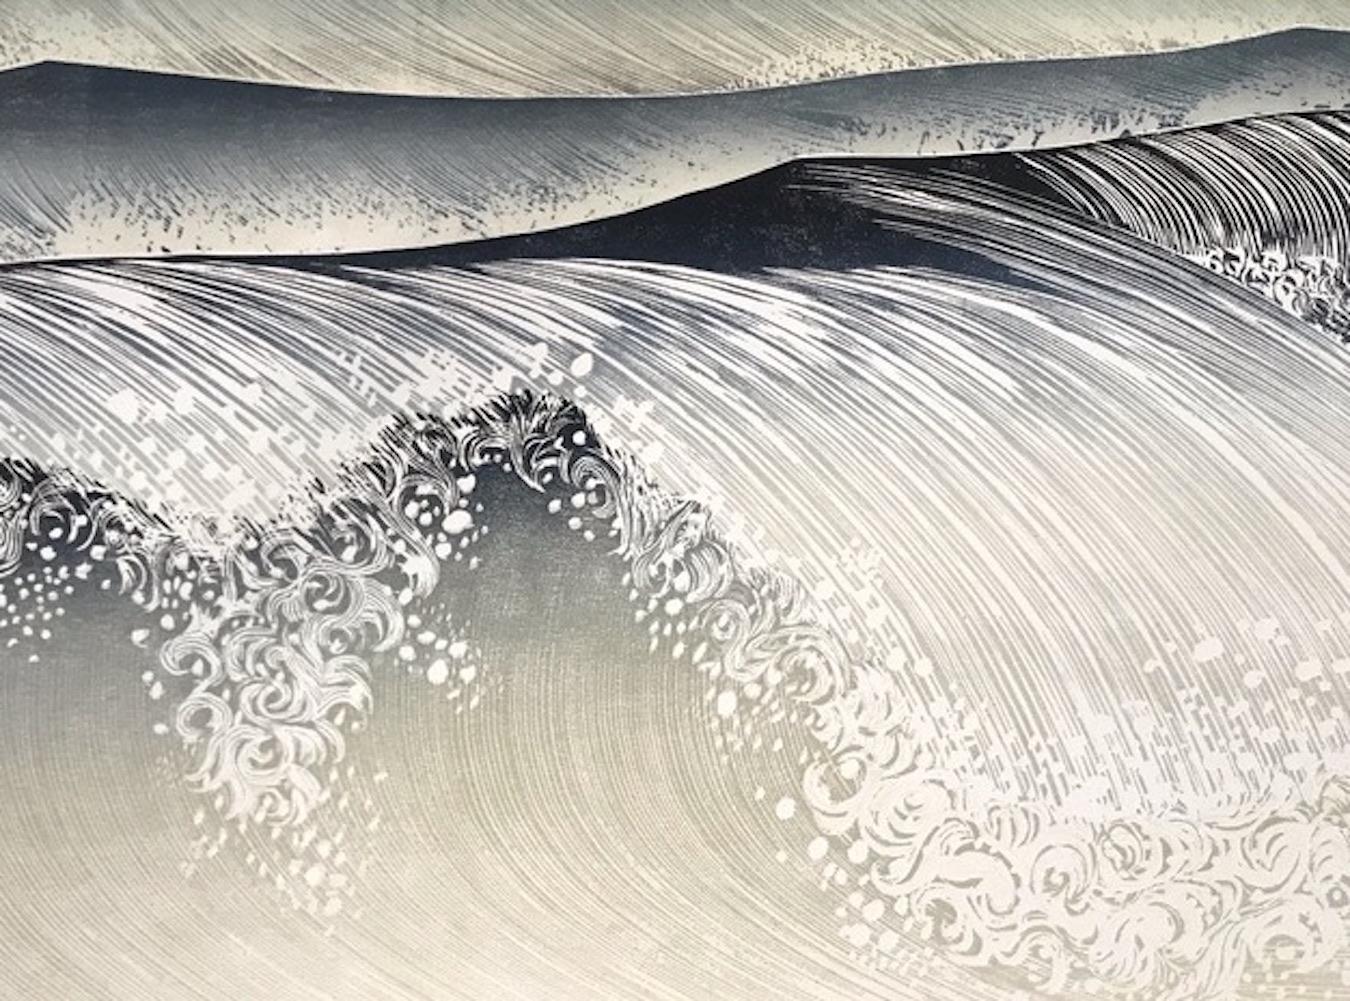 Shore Break by Rod Nelson [2021]
limited_edition and hand signed by the artist 
Woodcut Print on on Somerset Satin 300gsm acid free paper
Edition number of 50
Image size: H:72 cm x W:106 cm
Complete Size of Unframed Work: H:72 cm x W:106 cm x